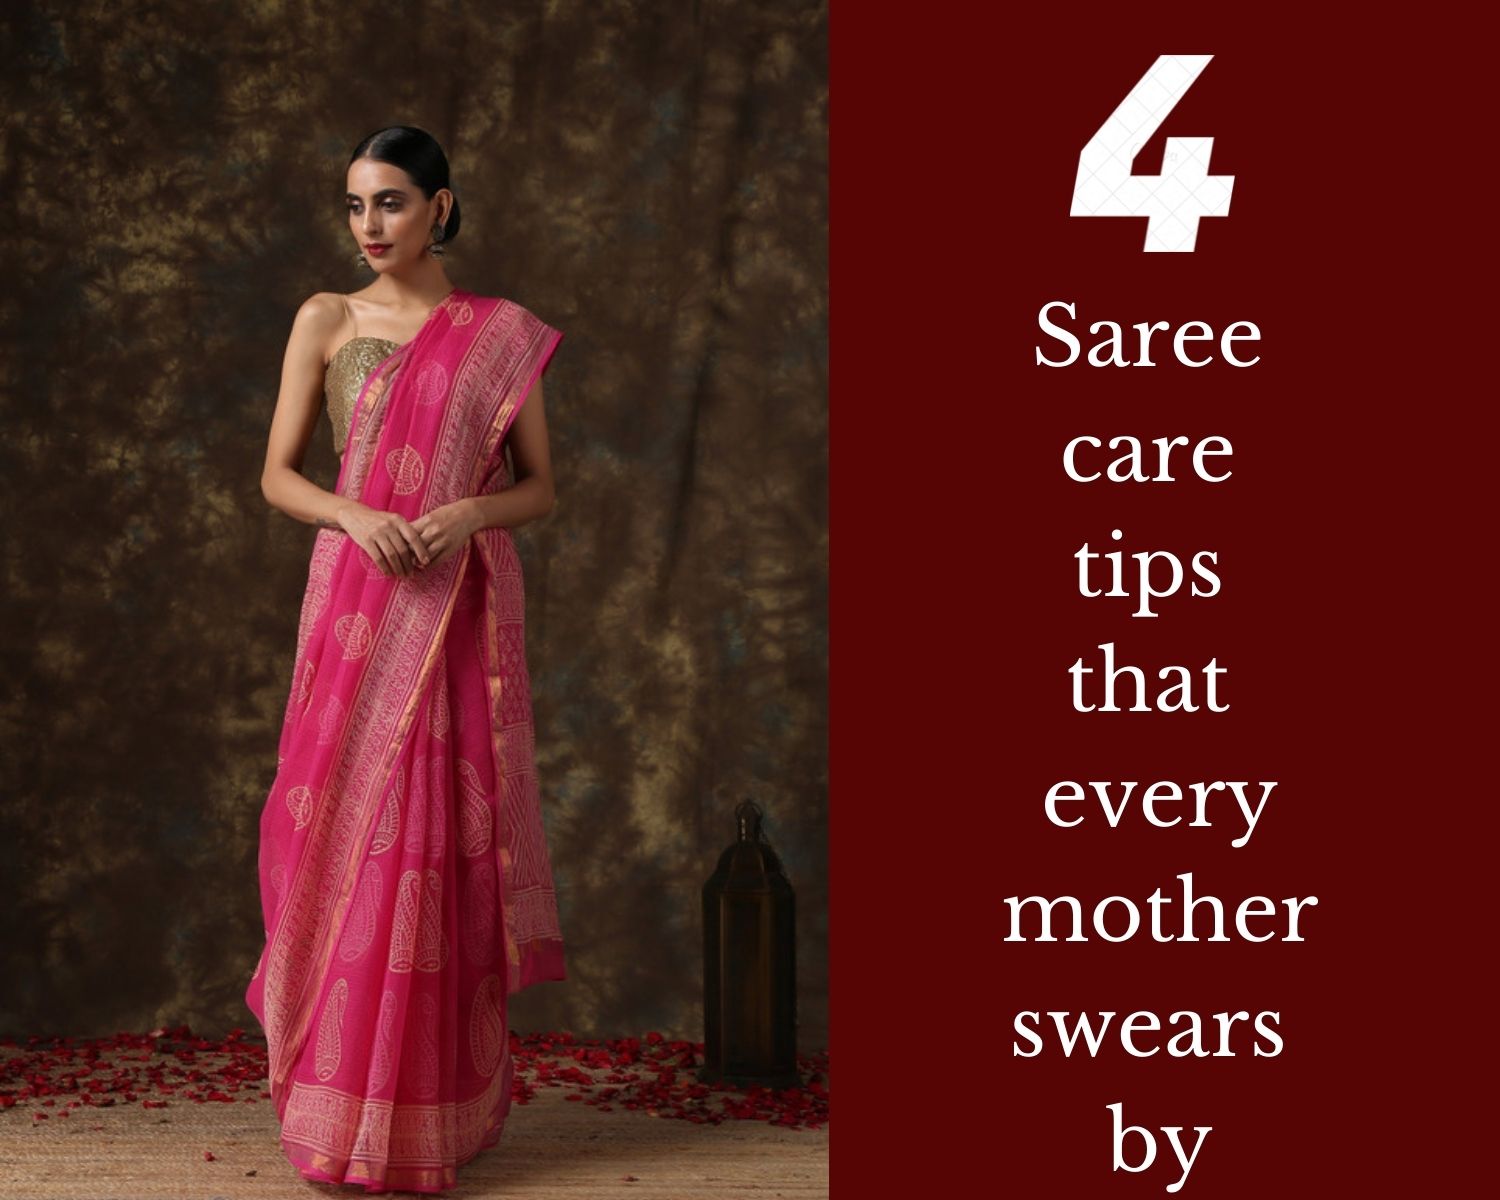 4 Saree Care Tips That Every Mother Swears by